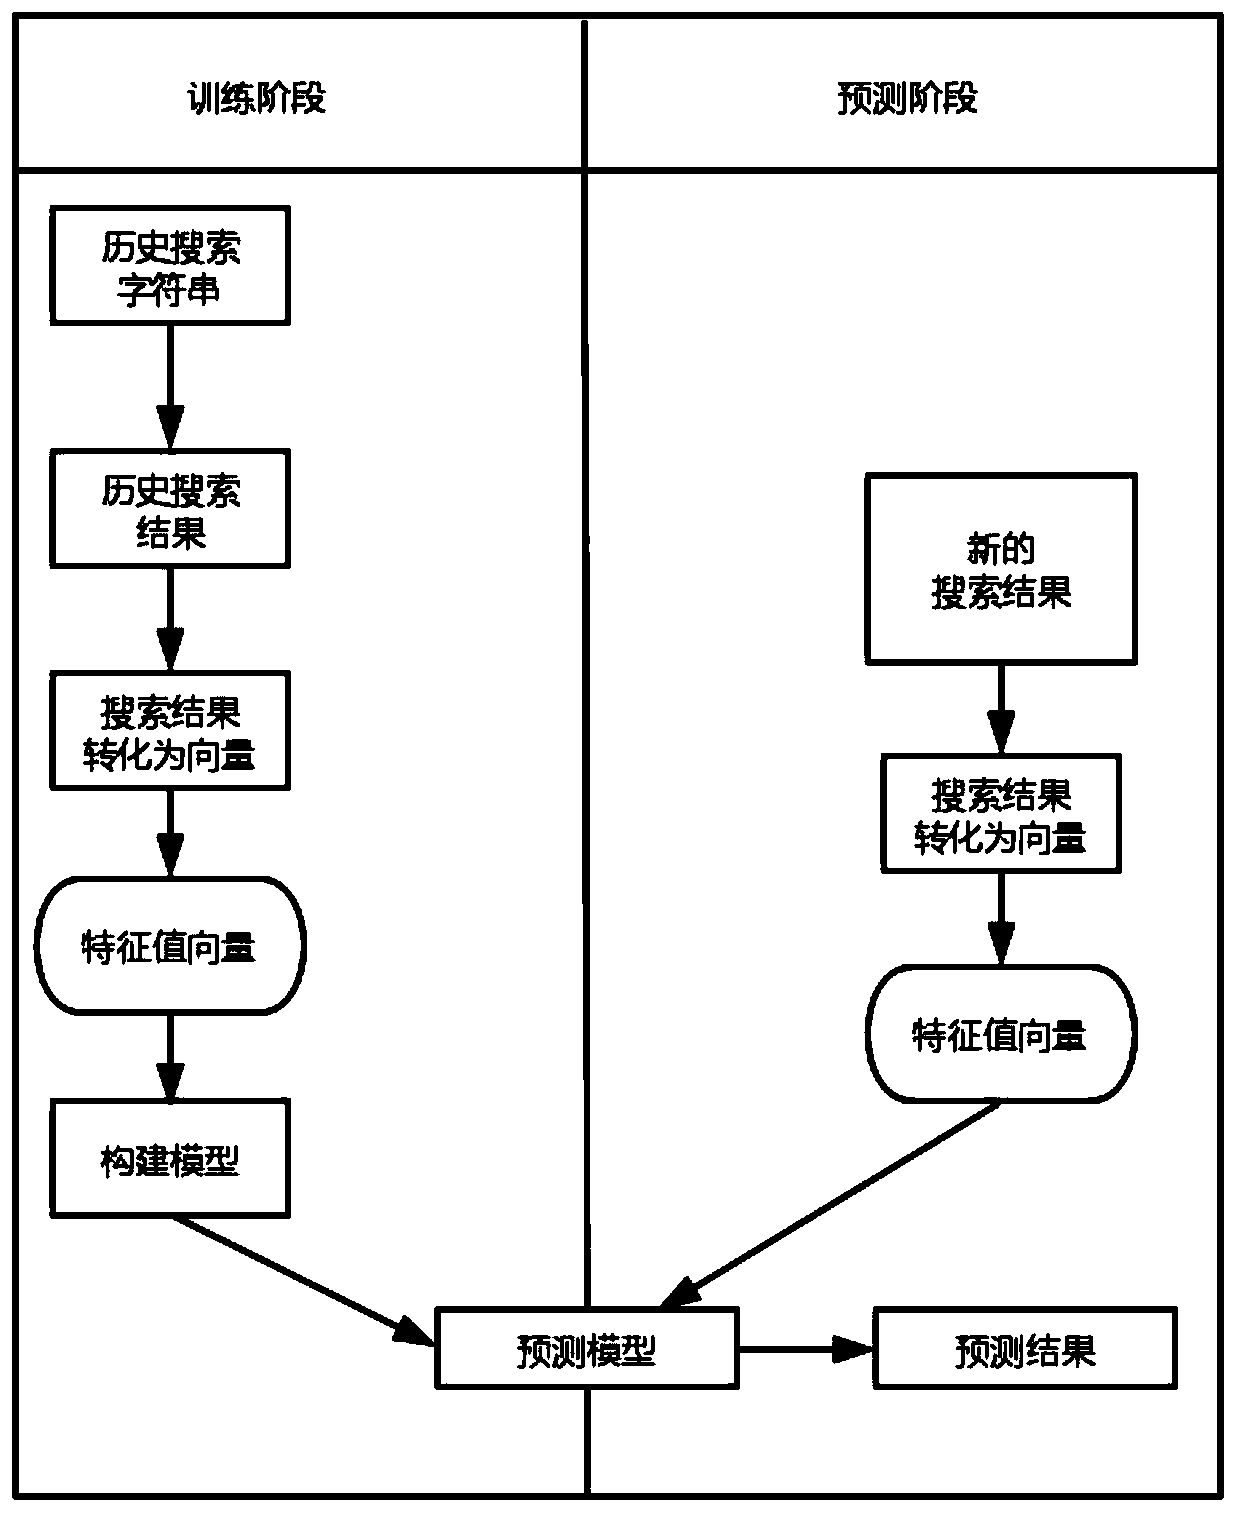 Elderly user use disorder reporting and solving method of mobile phone terminal